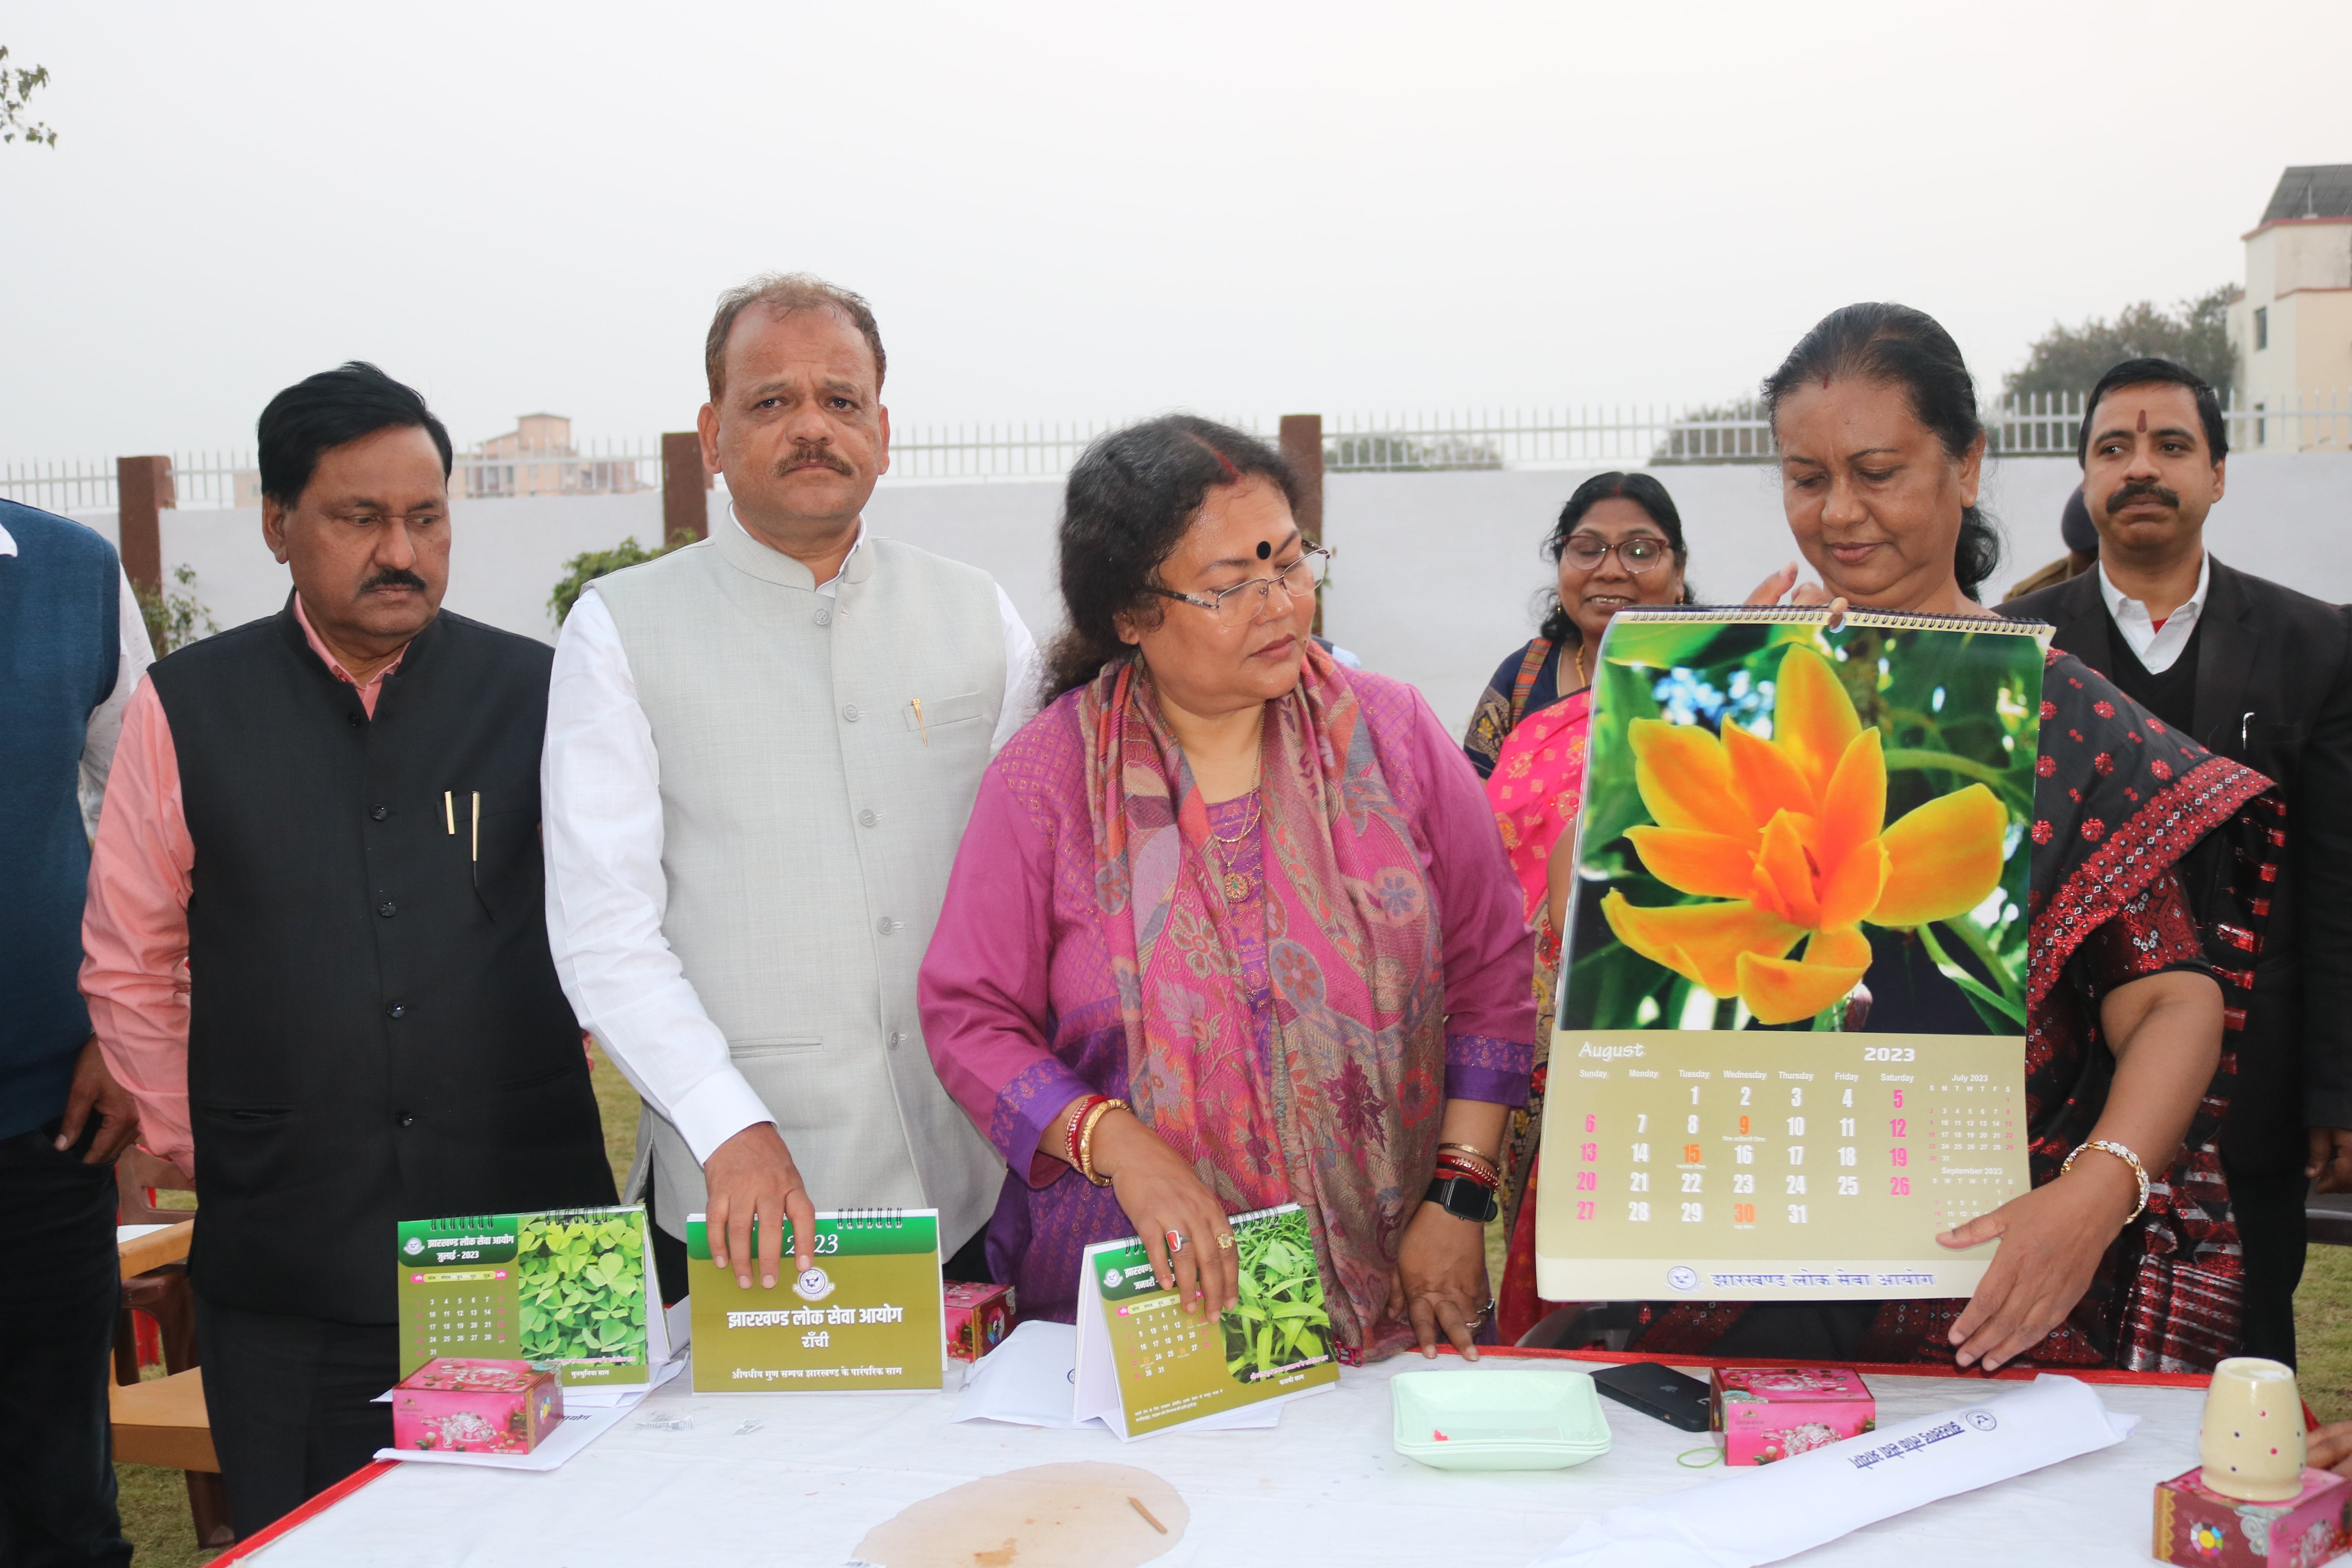 Calender released by JPSC on Foundation Day